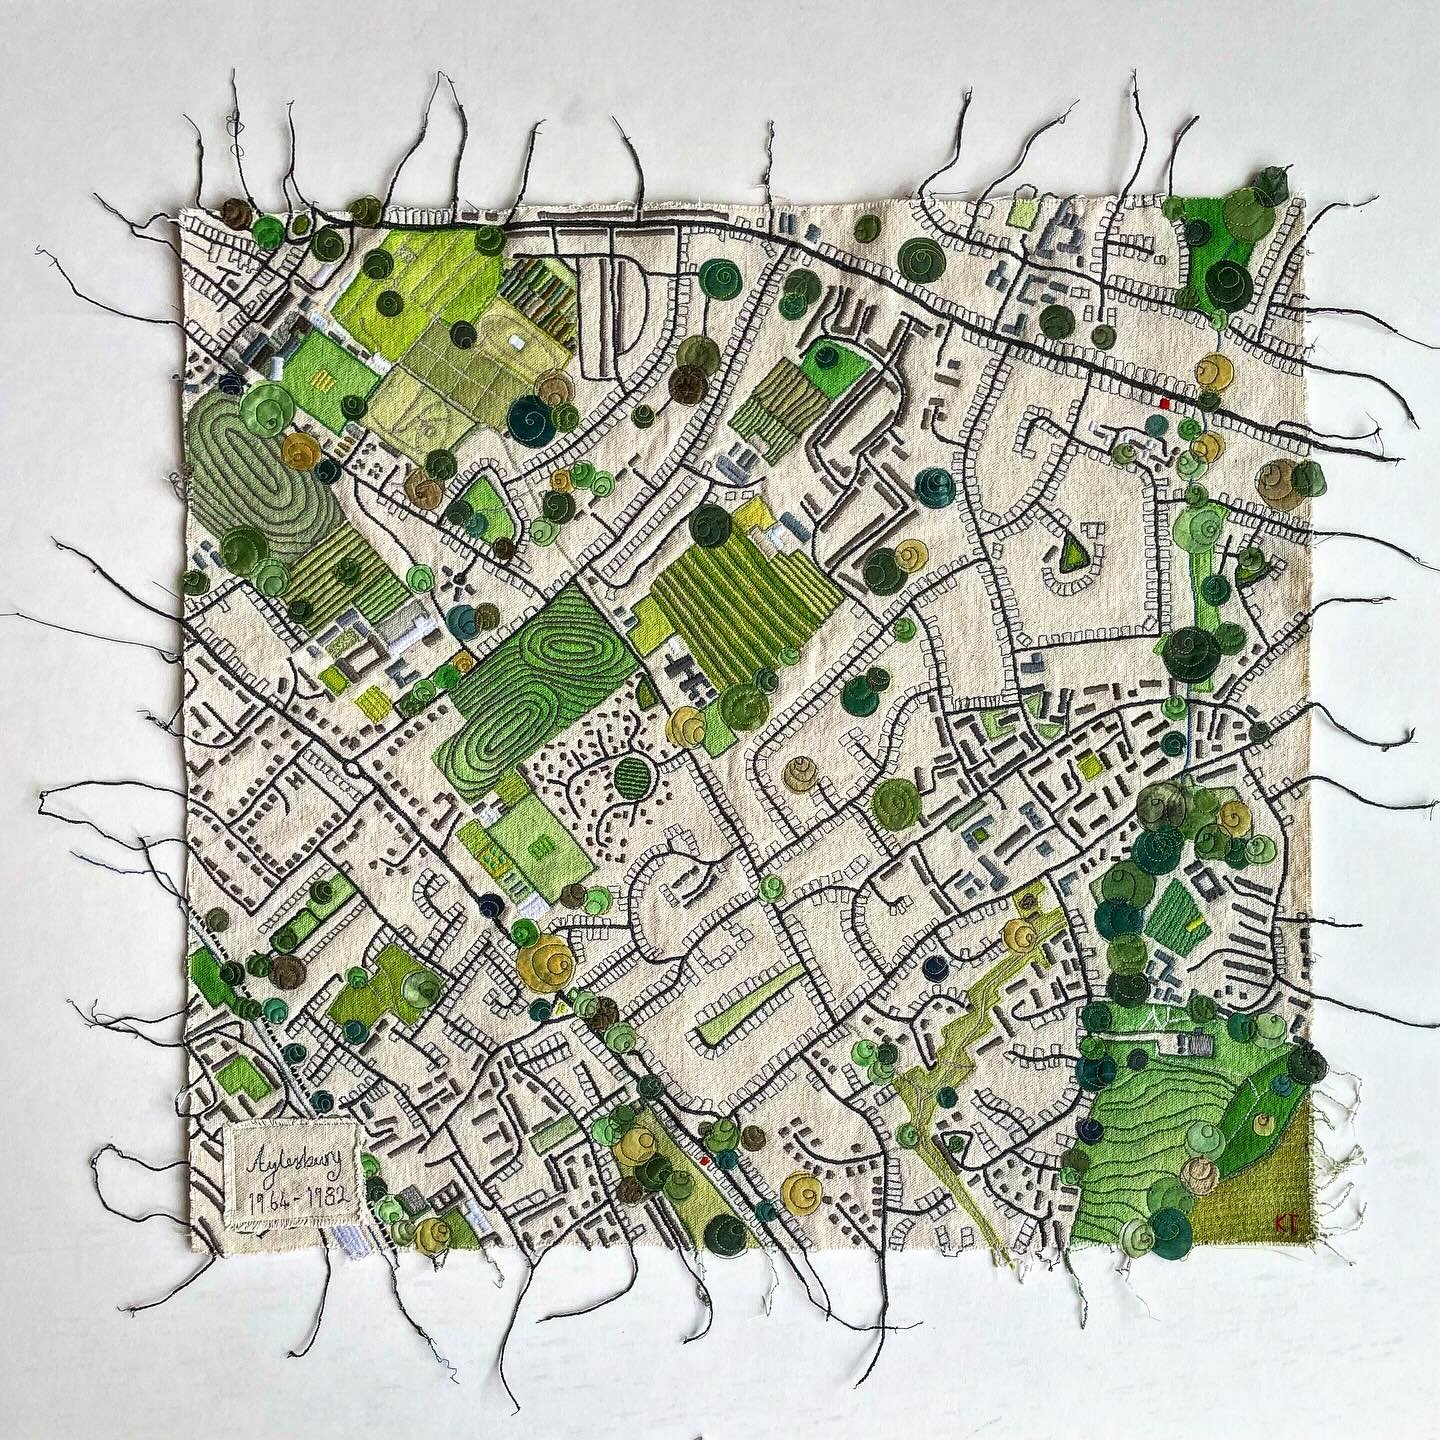 Here is a commission I made earlier this year of a part of Aylesbury town in Buckinghamshire. Despite being quite an urban environment it has a surprising number of green spaces which made for a wonderful map -in my eyes! Once again this is a map mad